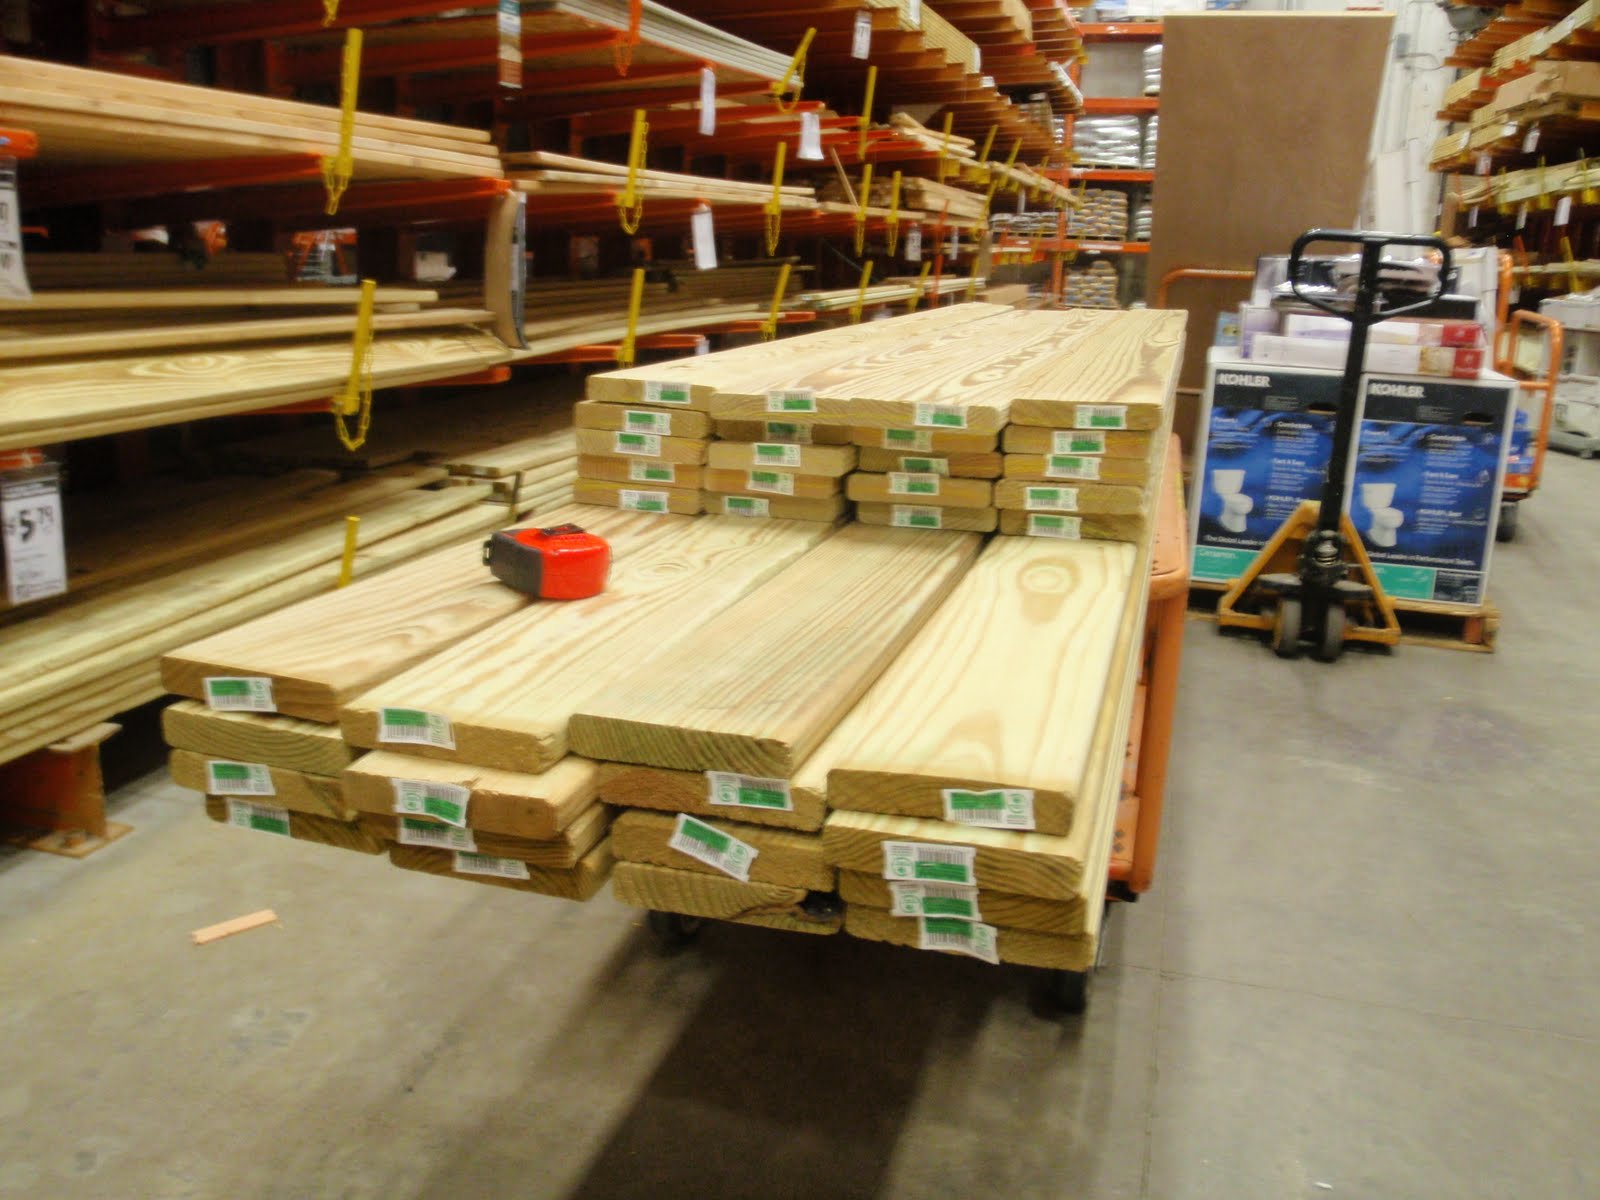 Home Depot sued for advertising 3.5 x 3.5 lumber as 4 x 4